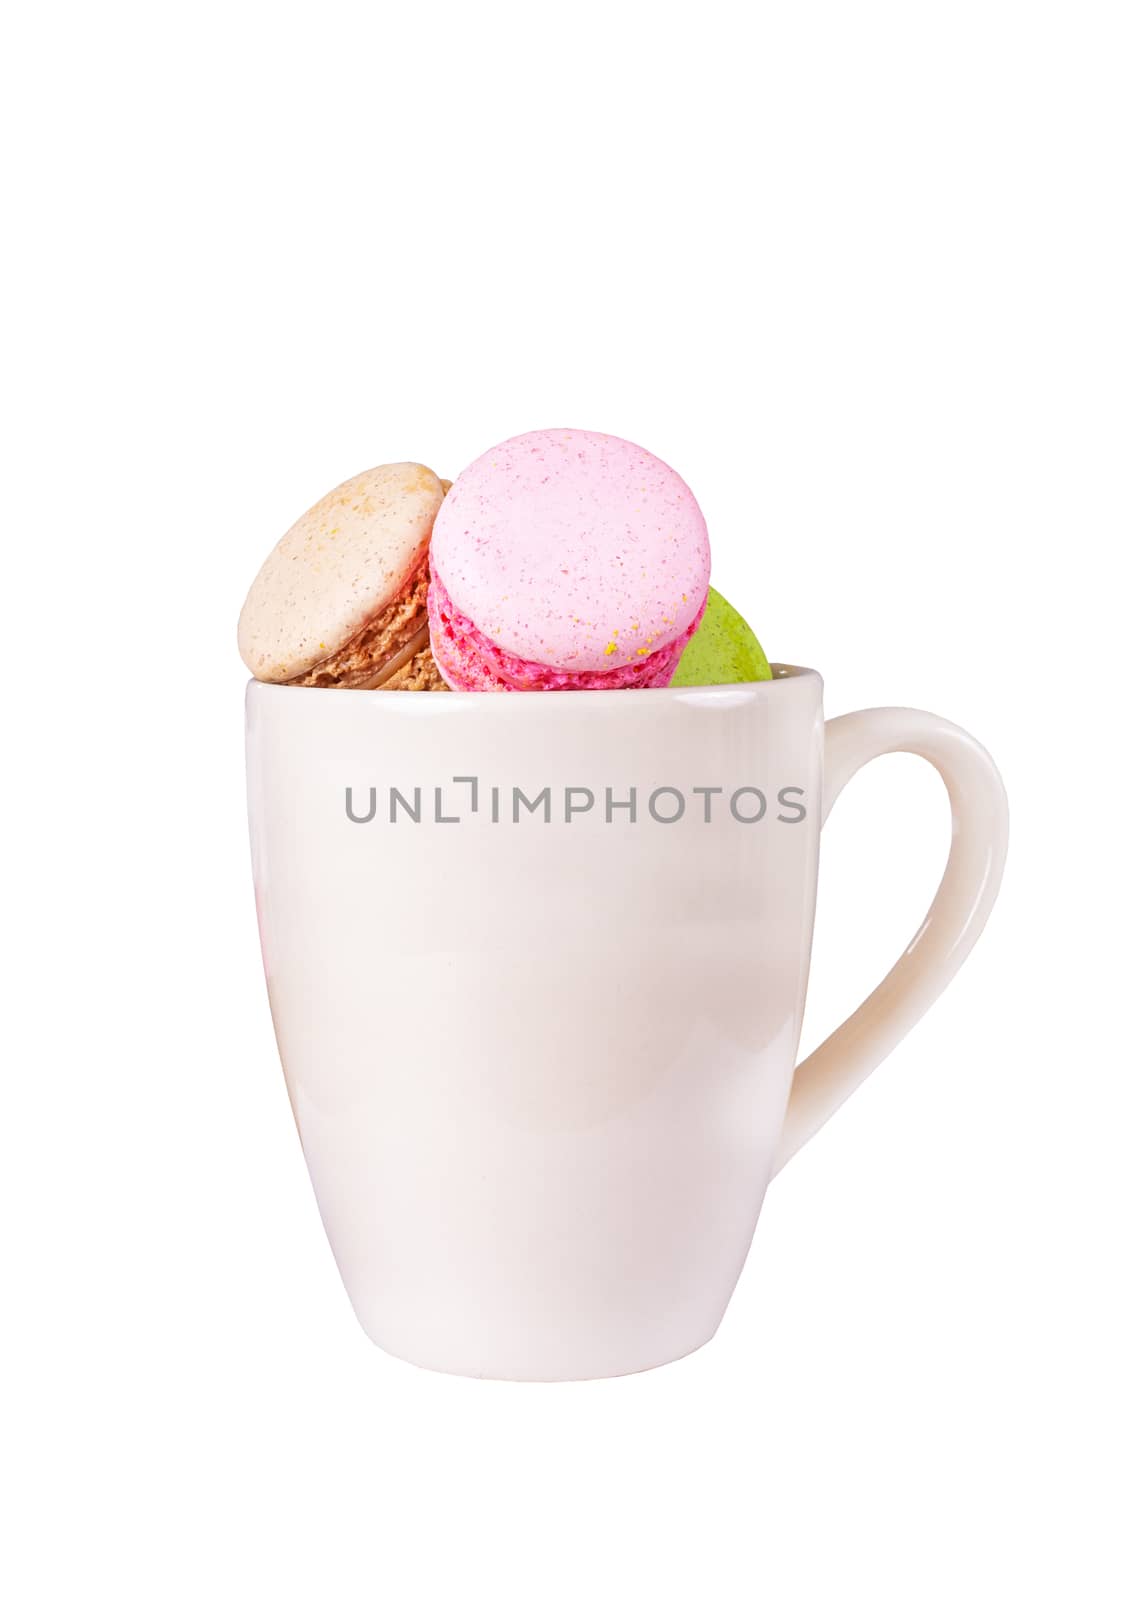 traditional french colorful sweet Macaron in cup on white background